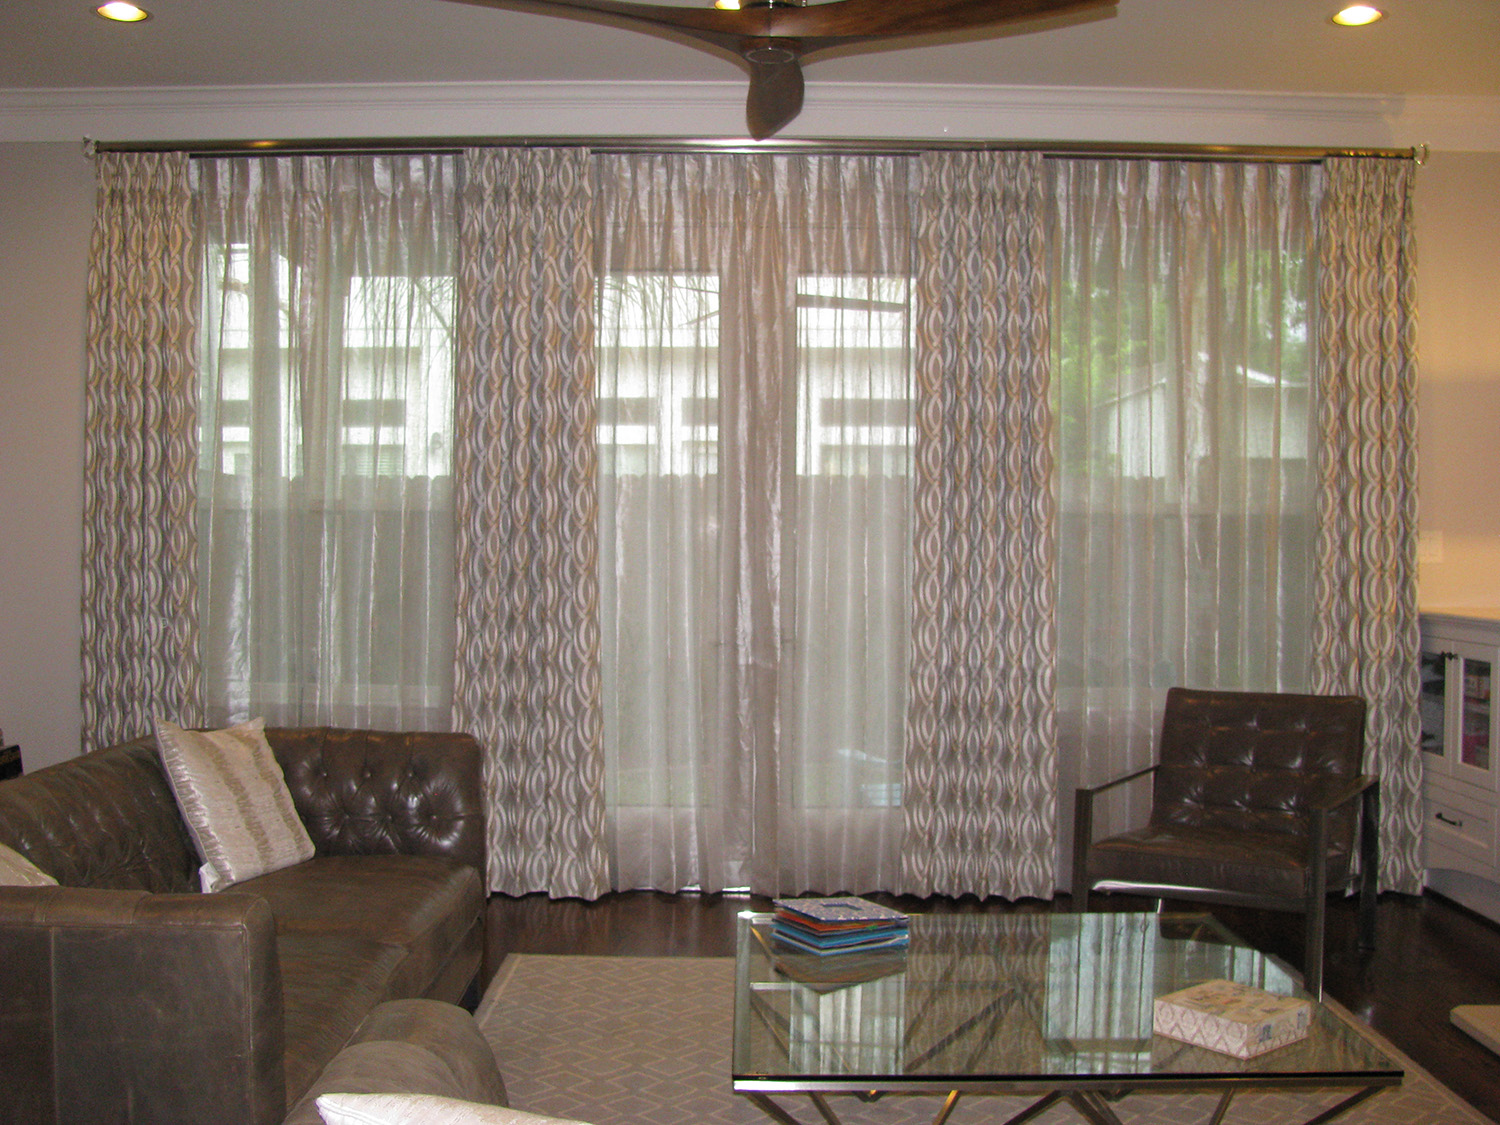 Functioning pleated sheer draperies with stationary pleated panels mounted on decorative traverse rod_1500x1125